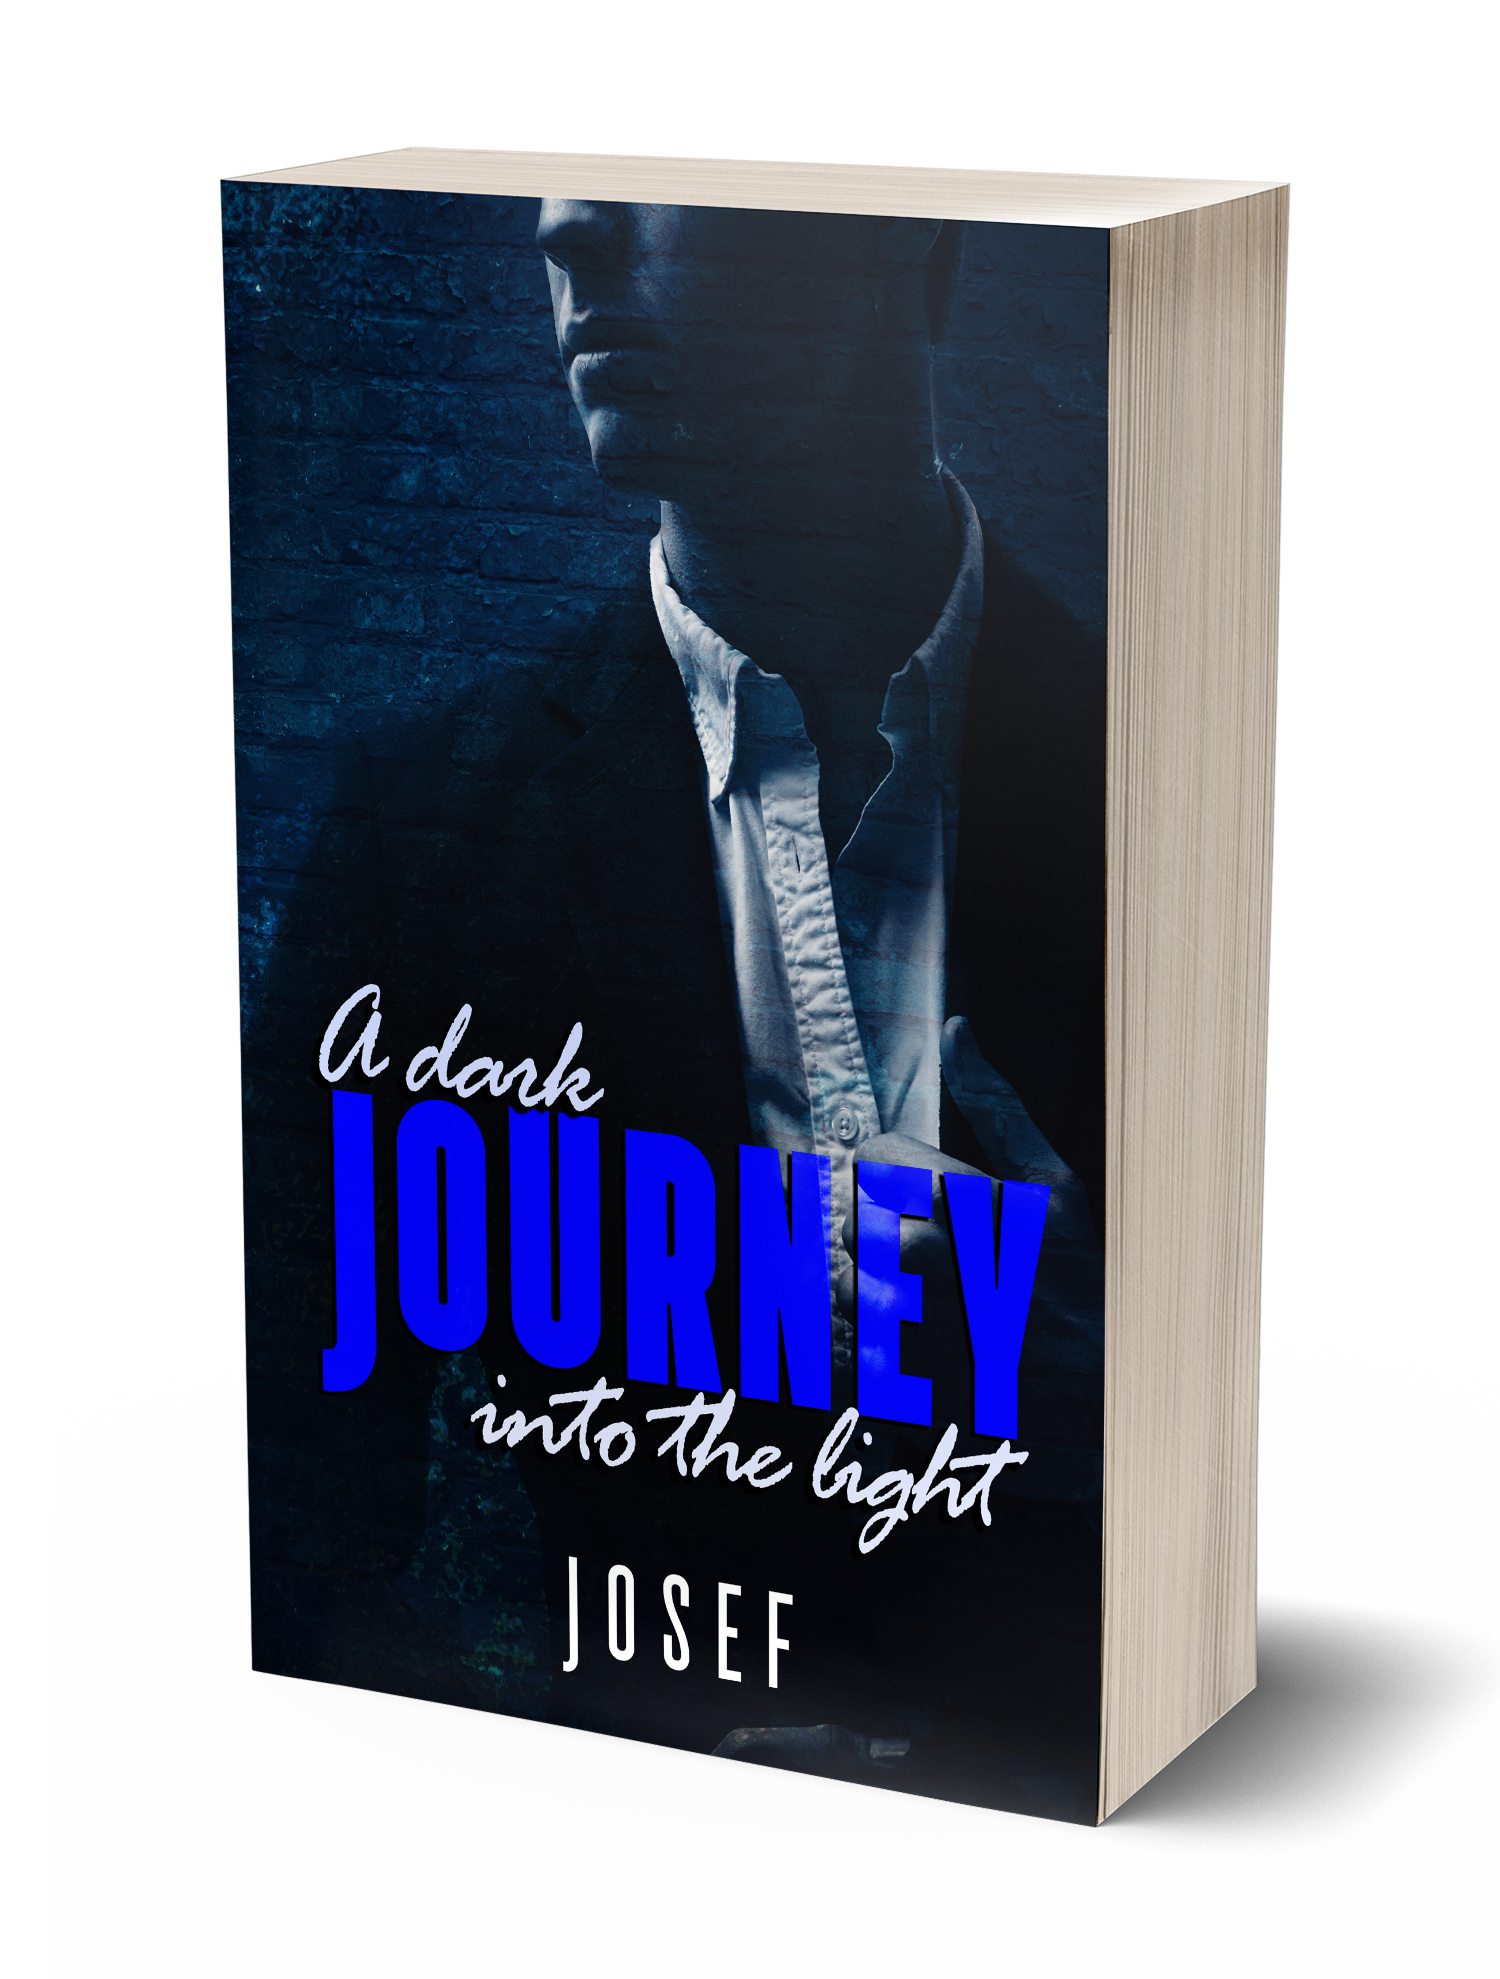 FREE: A dark journey into the light by Josef